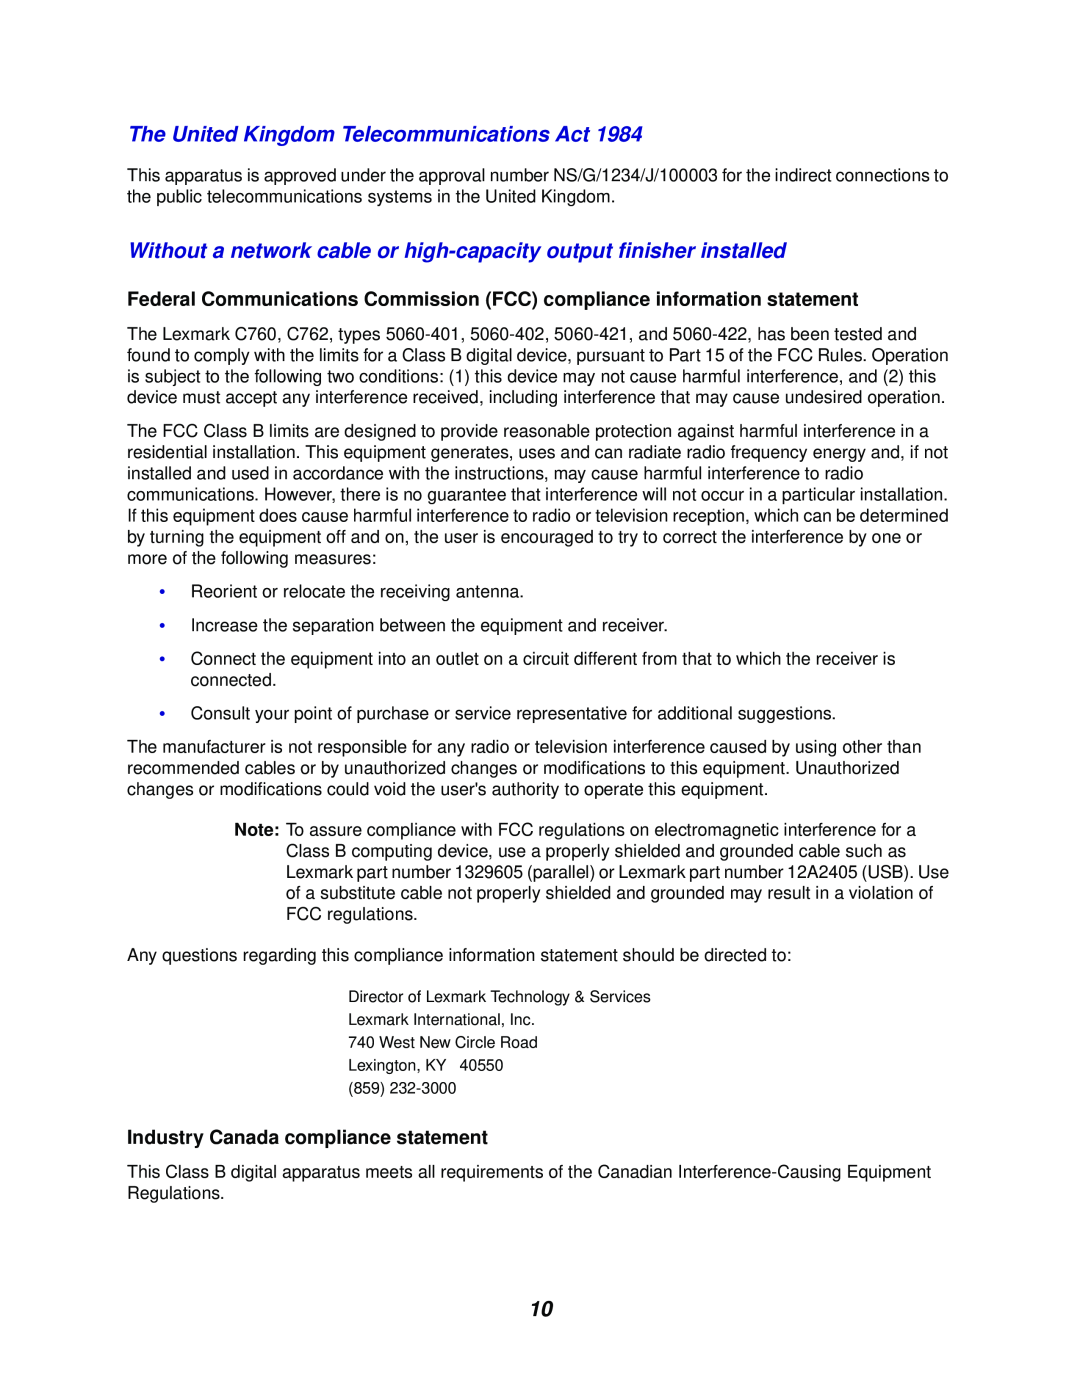 Lexmark 762 manual The United Kingdom Telecommunications Act, Industry Canada compliance statement 